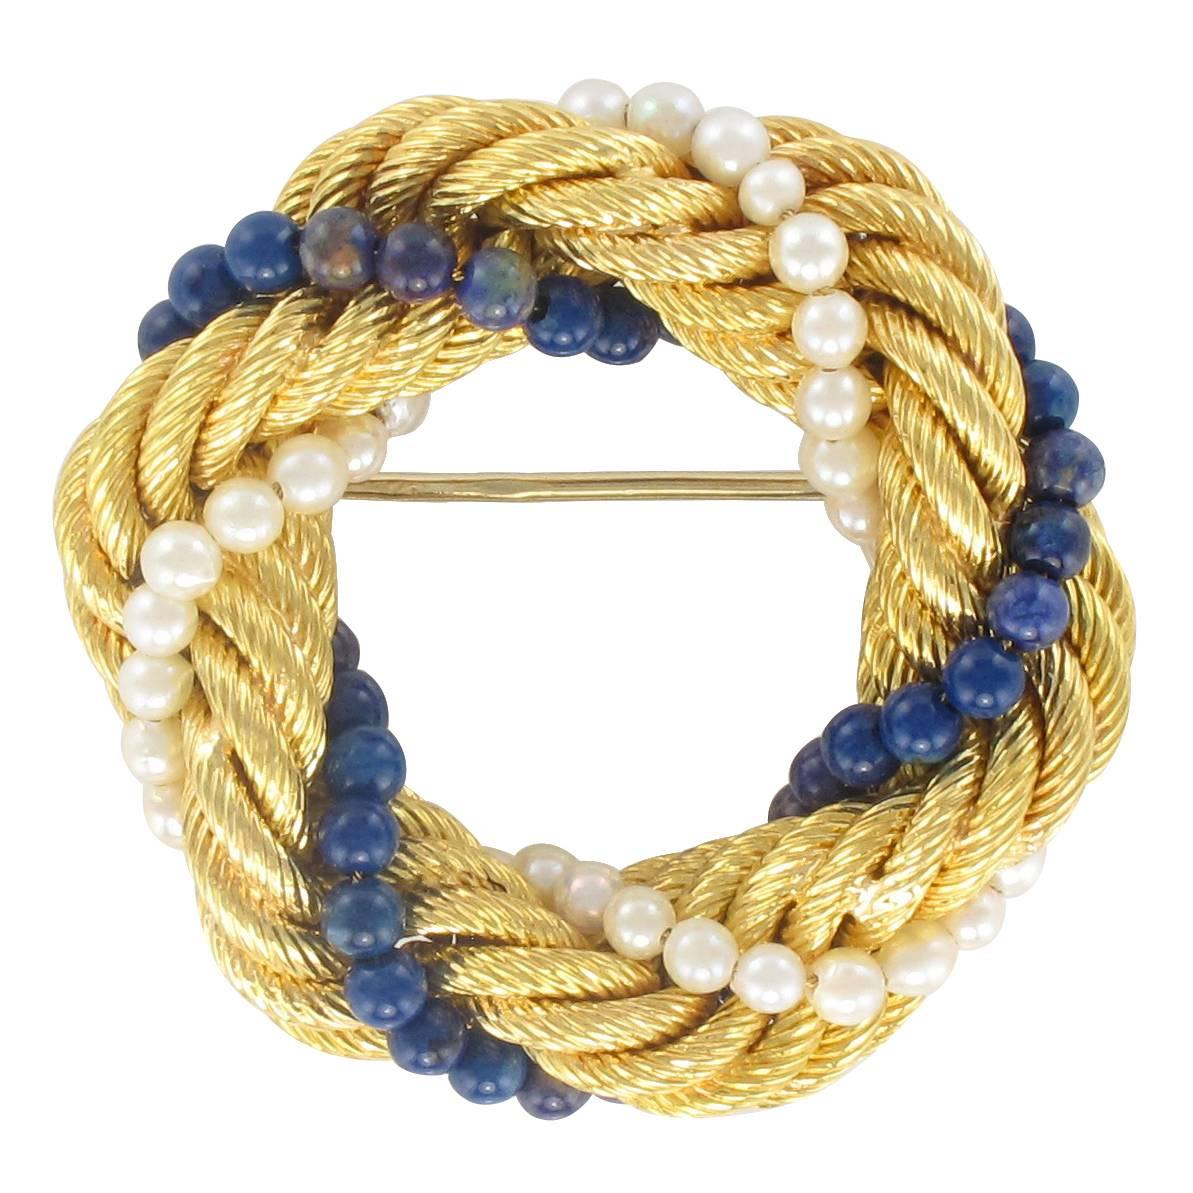 Brooch in 18 carat yellow gold. 
This splendid round antique brooch is composed of a golden twisted rope entwined with a strand of small white cultured pearls and a strand of small lapis lazuli beads. The clasp is a pin. 
Diameter of pearls: 3